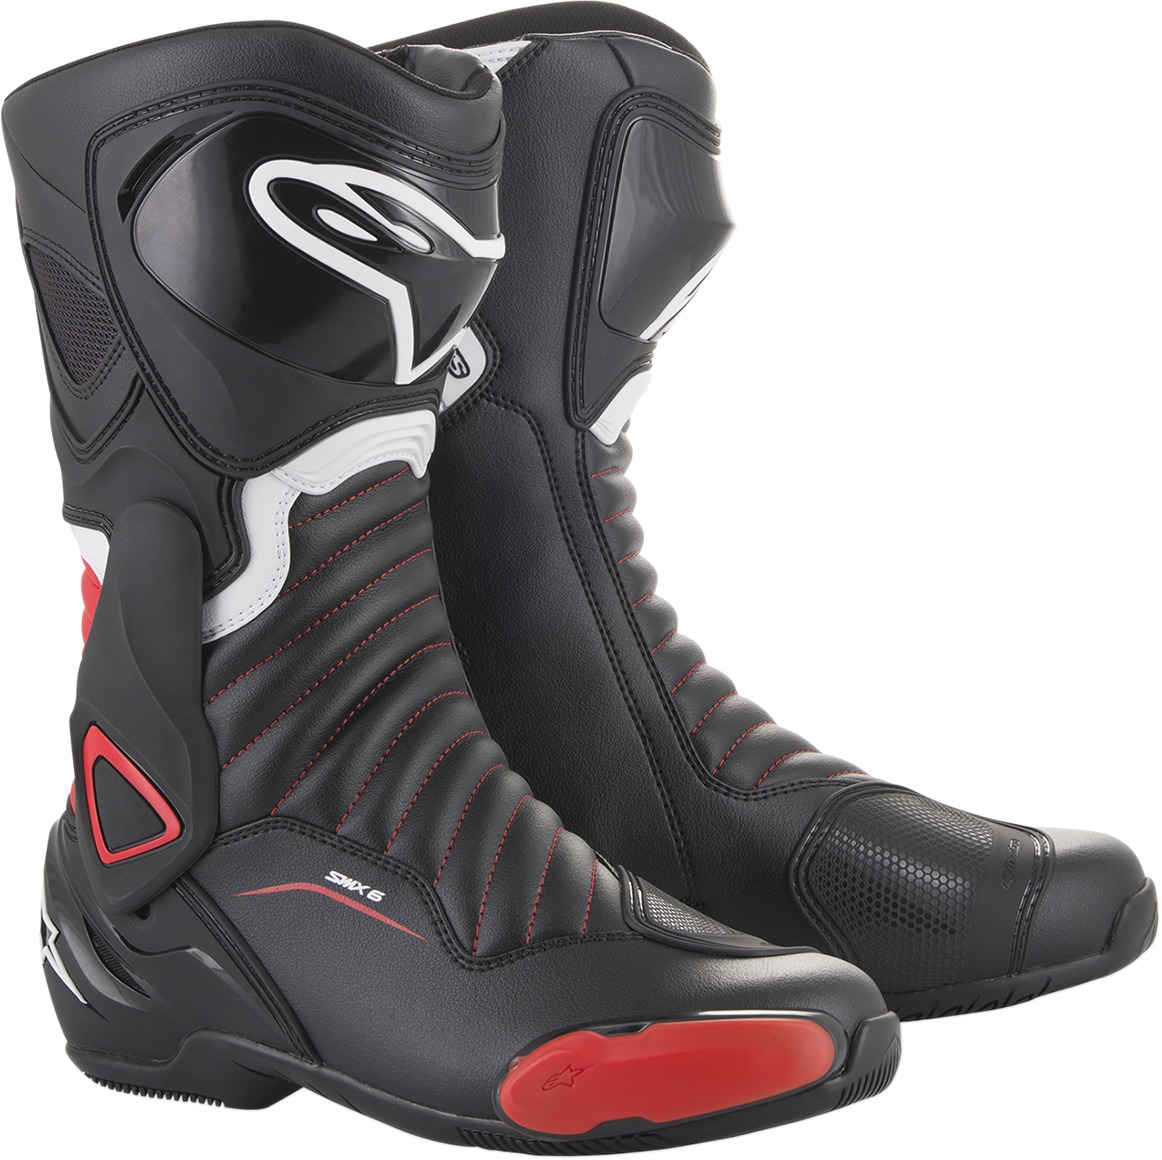 SMX-6v2 Street Riding Boots Black/Red US 6.5 - Click Image to Close